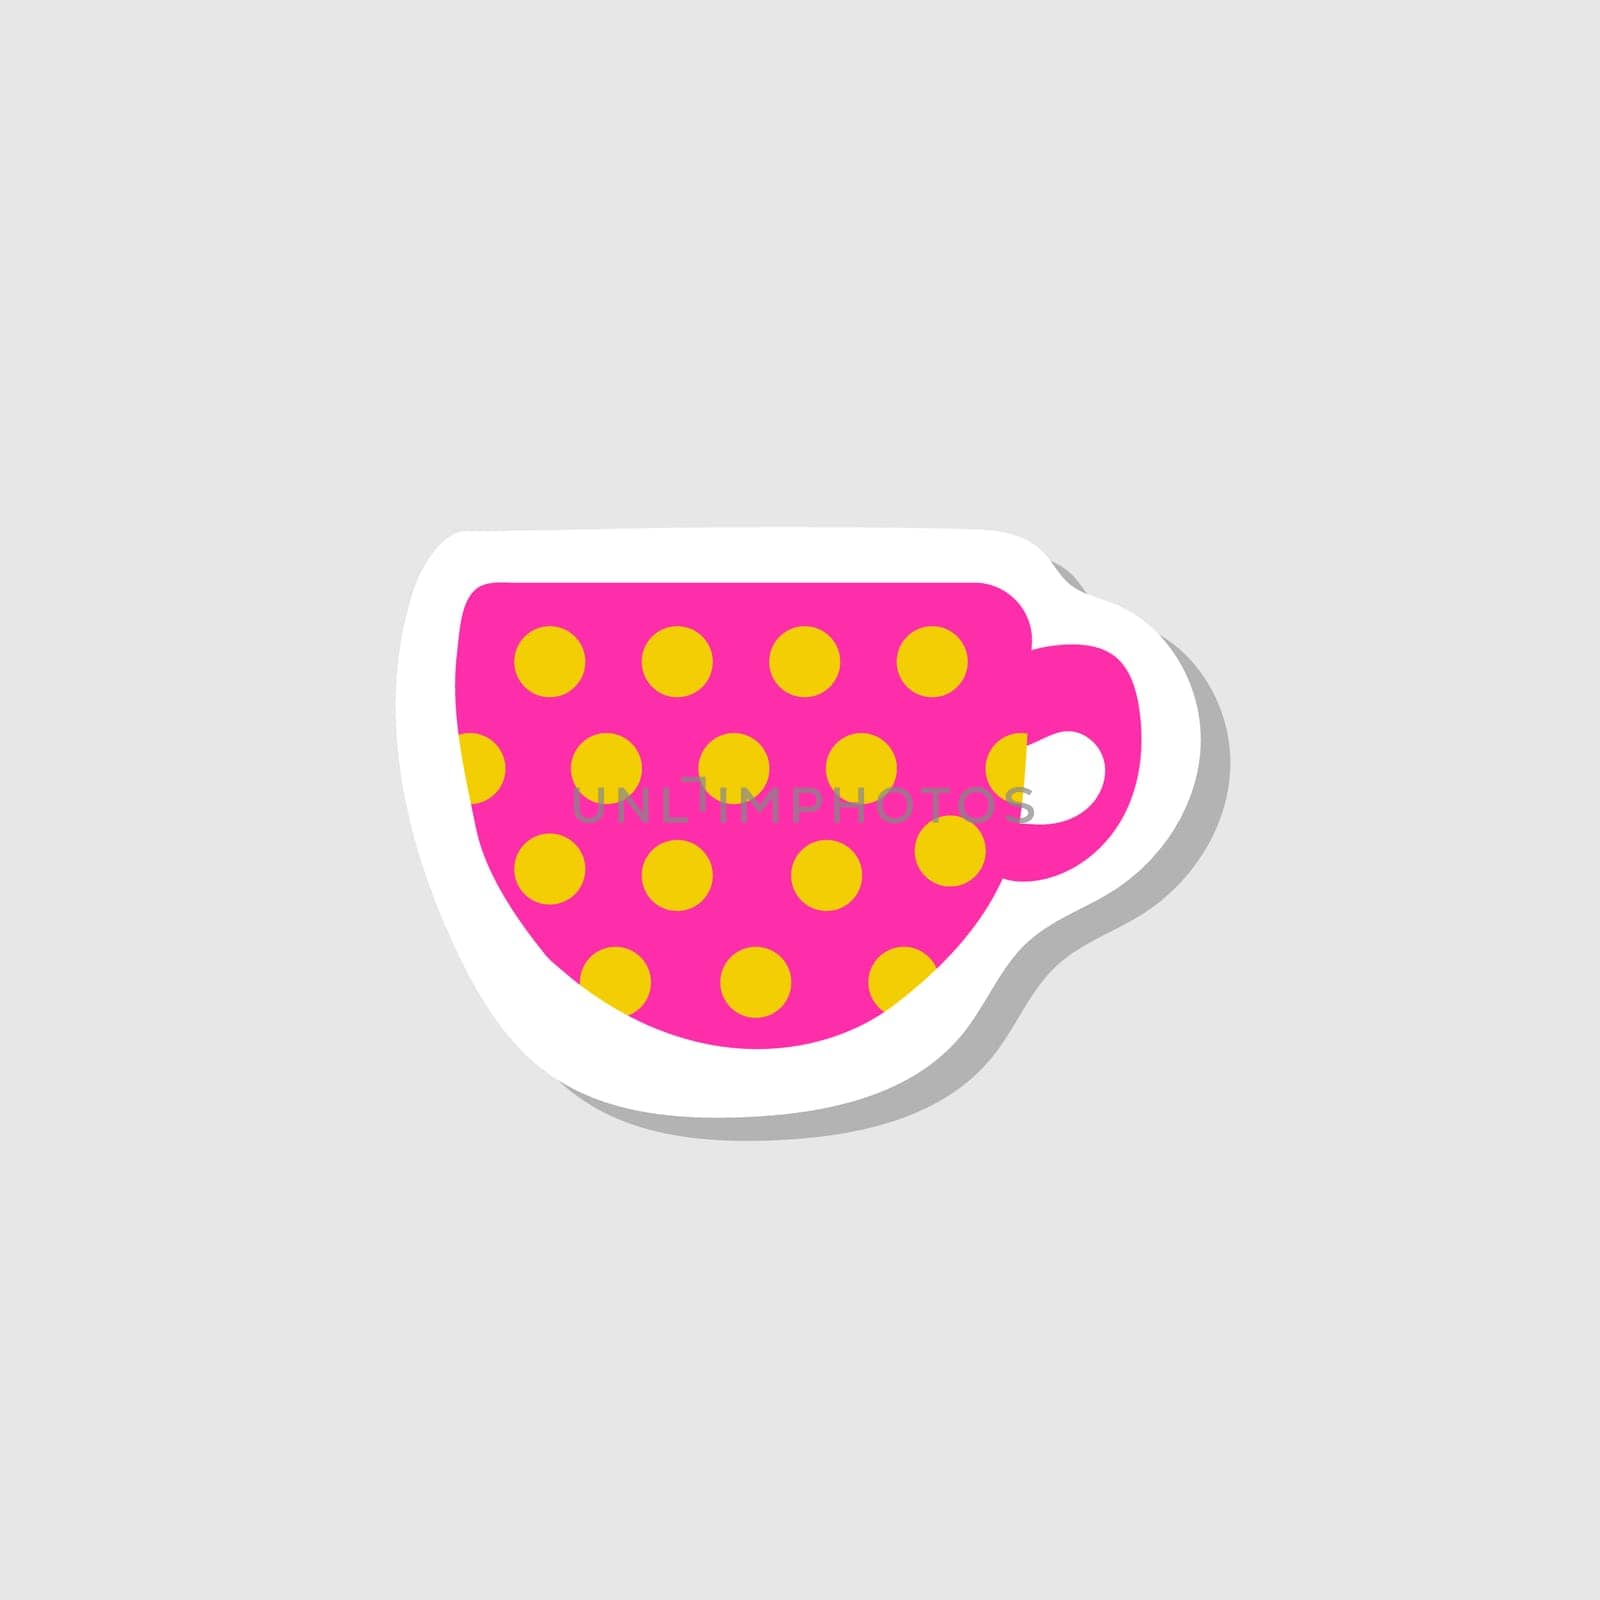 Cute cup. Pink dotted mug - modern cartoon style illustration for graphic design and sticker